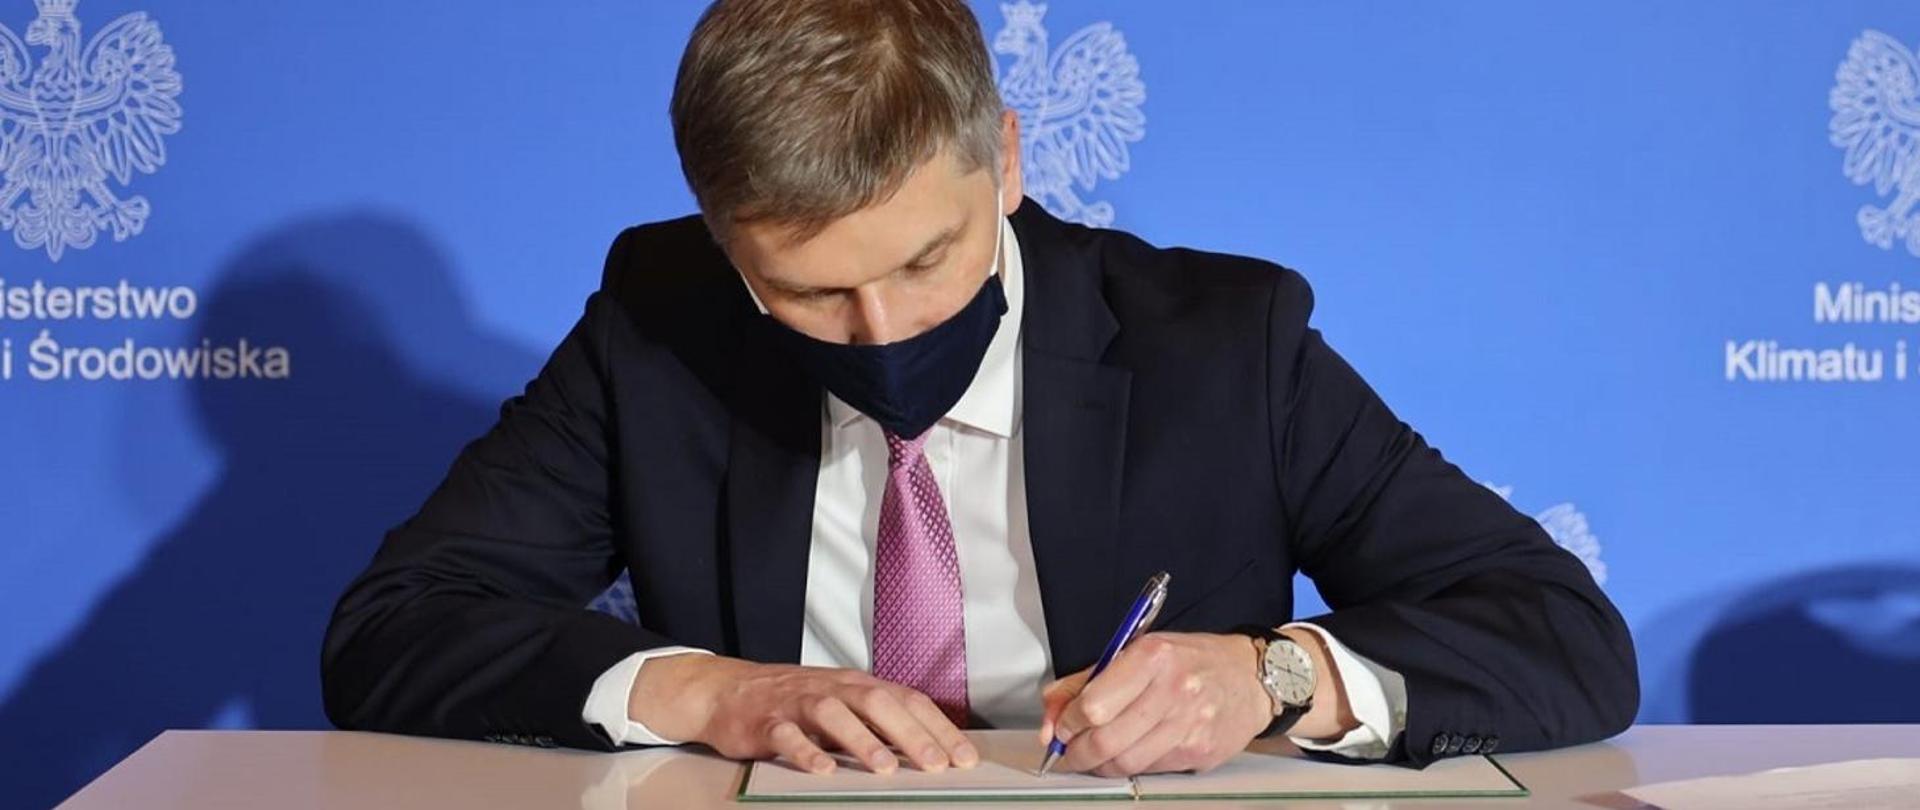 Minister Piotr Nowak signing the documents